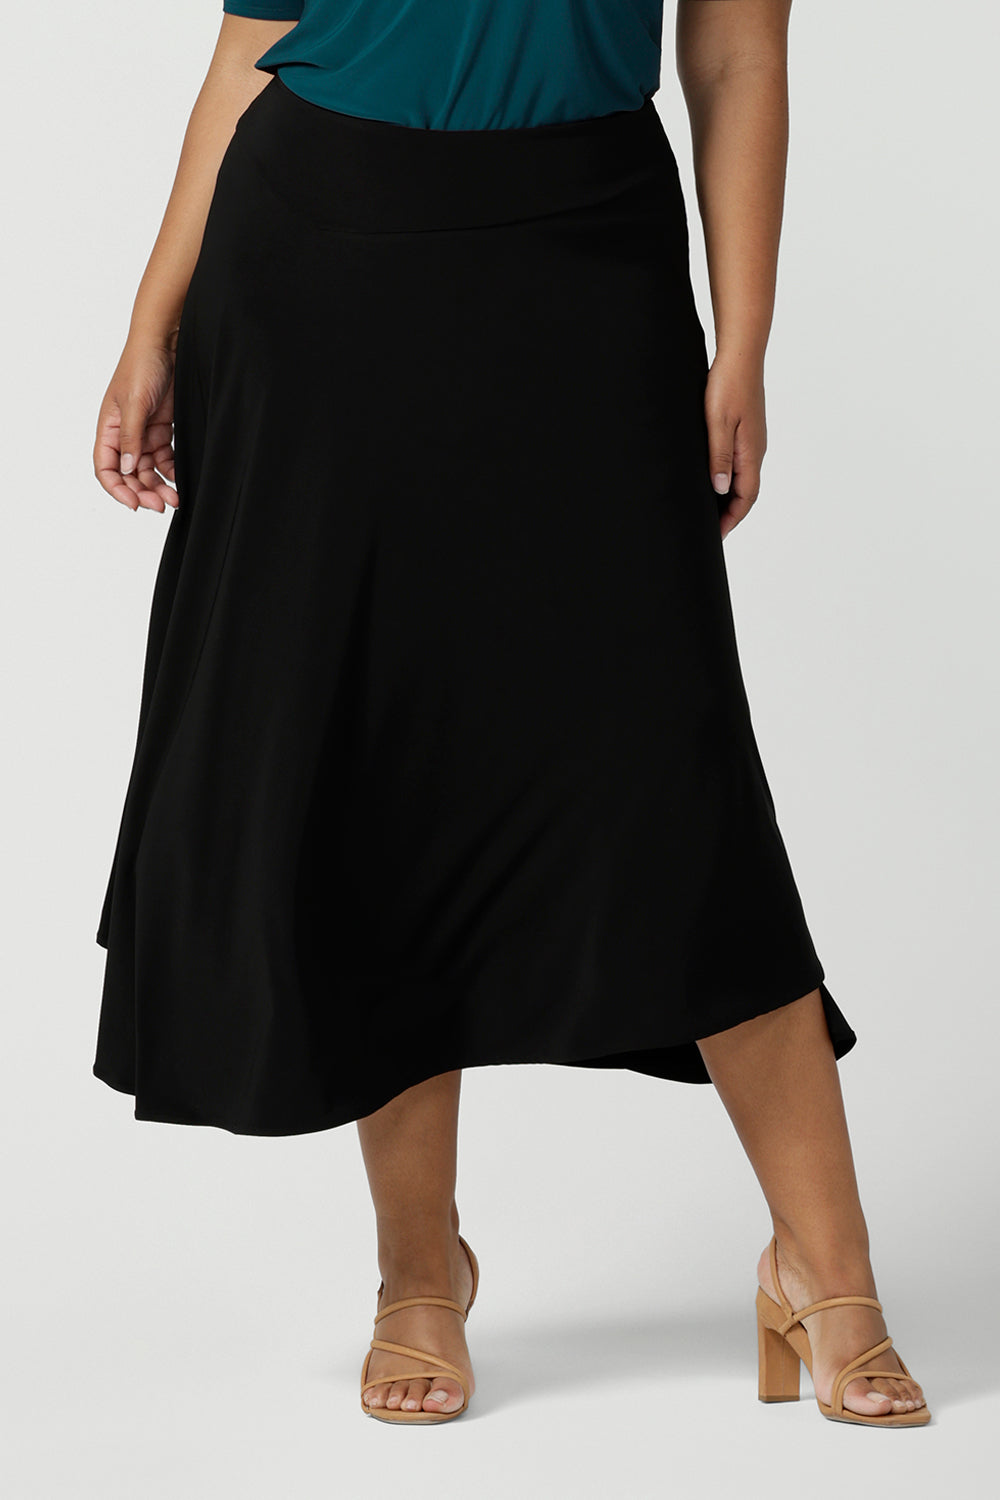 Close up of a size 18, plus size woman wears an asymmetric skirt in black jersey. Worn with a teal green short sleeve top with square neck, this comfortable jersey skirt works for work wear and eveningwear. Made in Australia by women's clothing brand, Leina & Fleur in petite, mid size and plus sizes. 